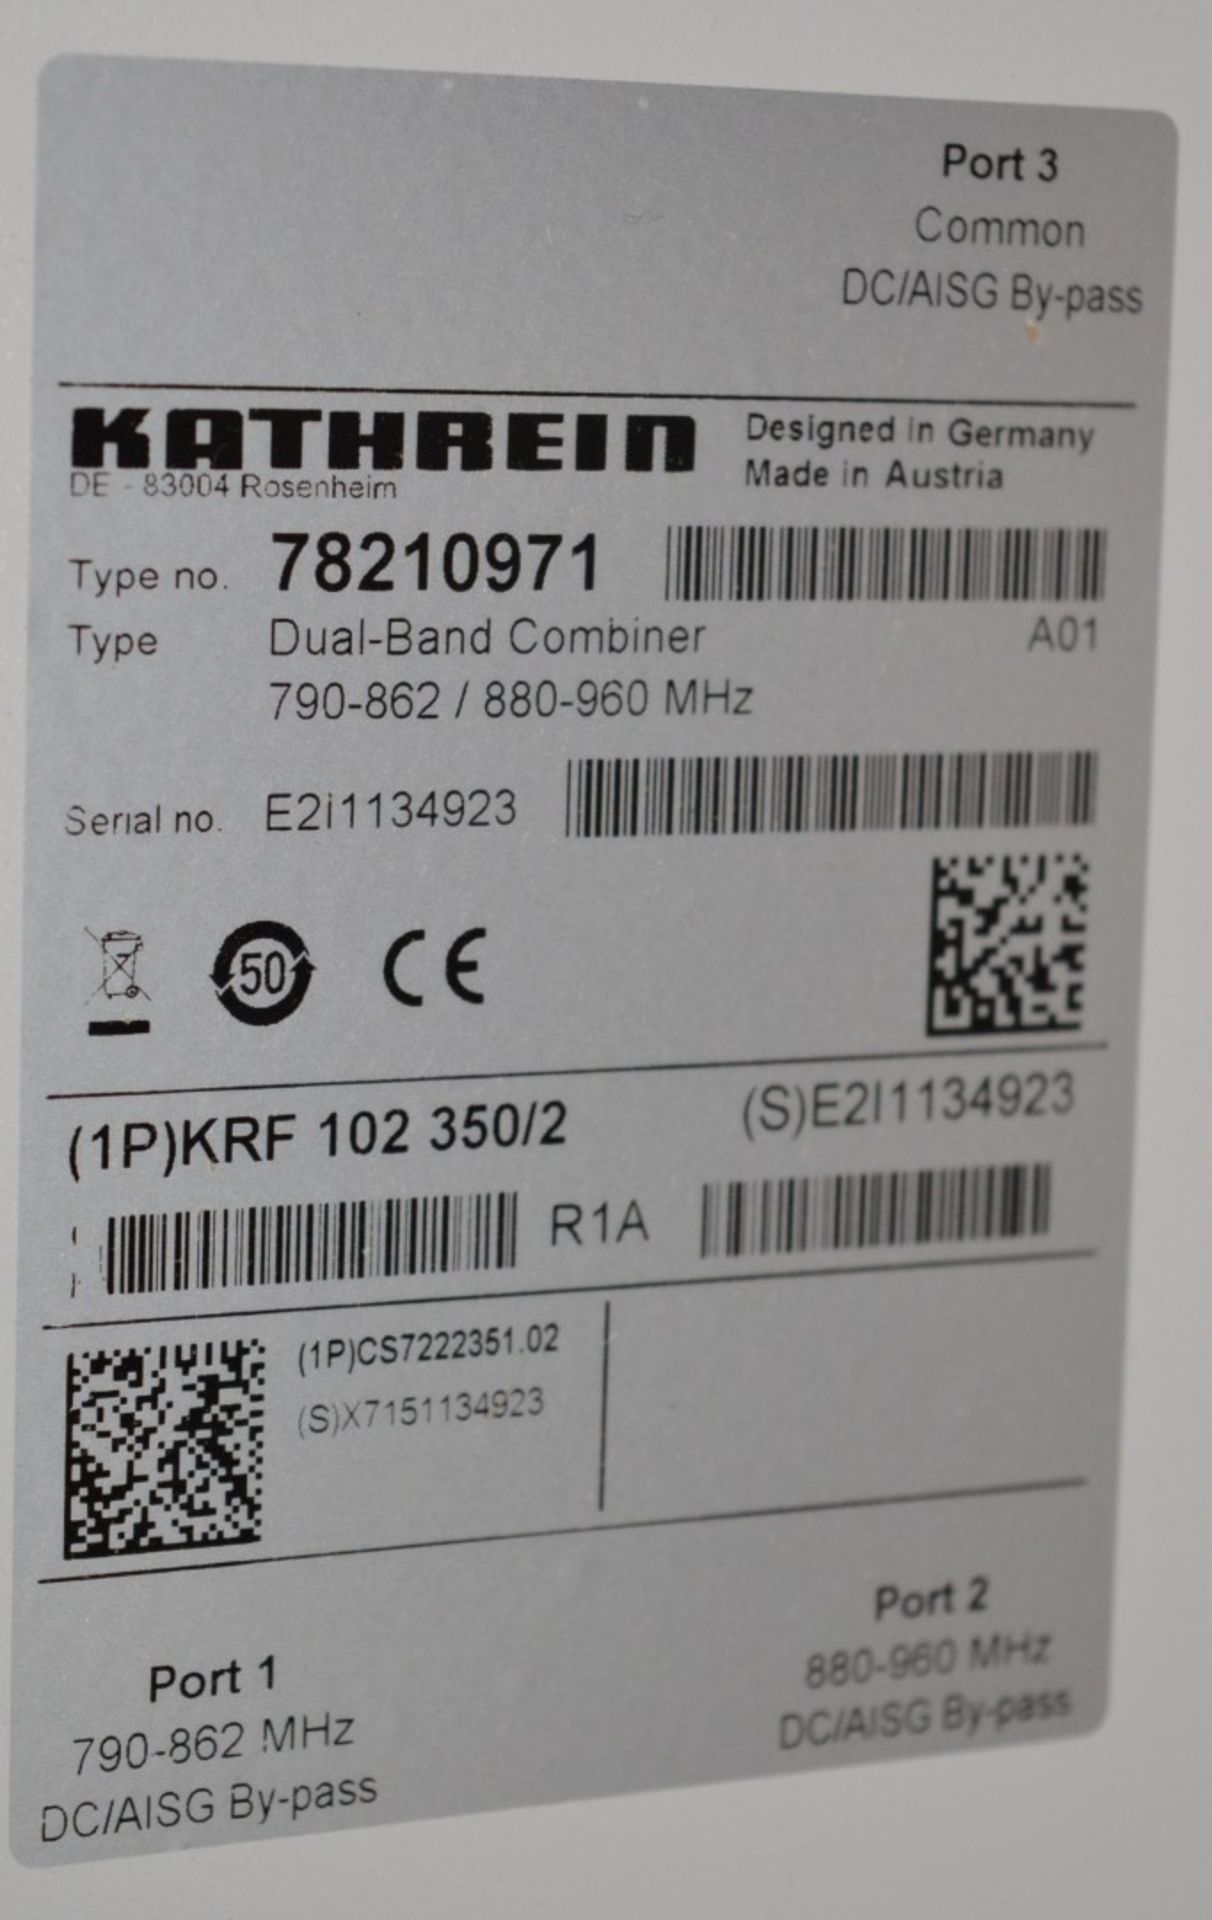 1 x Kathrein Dual Band Combiner Unit - Type 78210971 - 790-862 MHz LTE 800 / 880-960 MHz GSM 900 - - Image 7 of 7